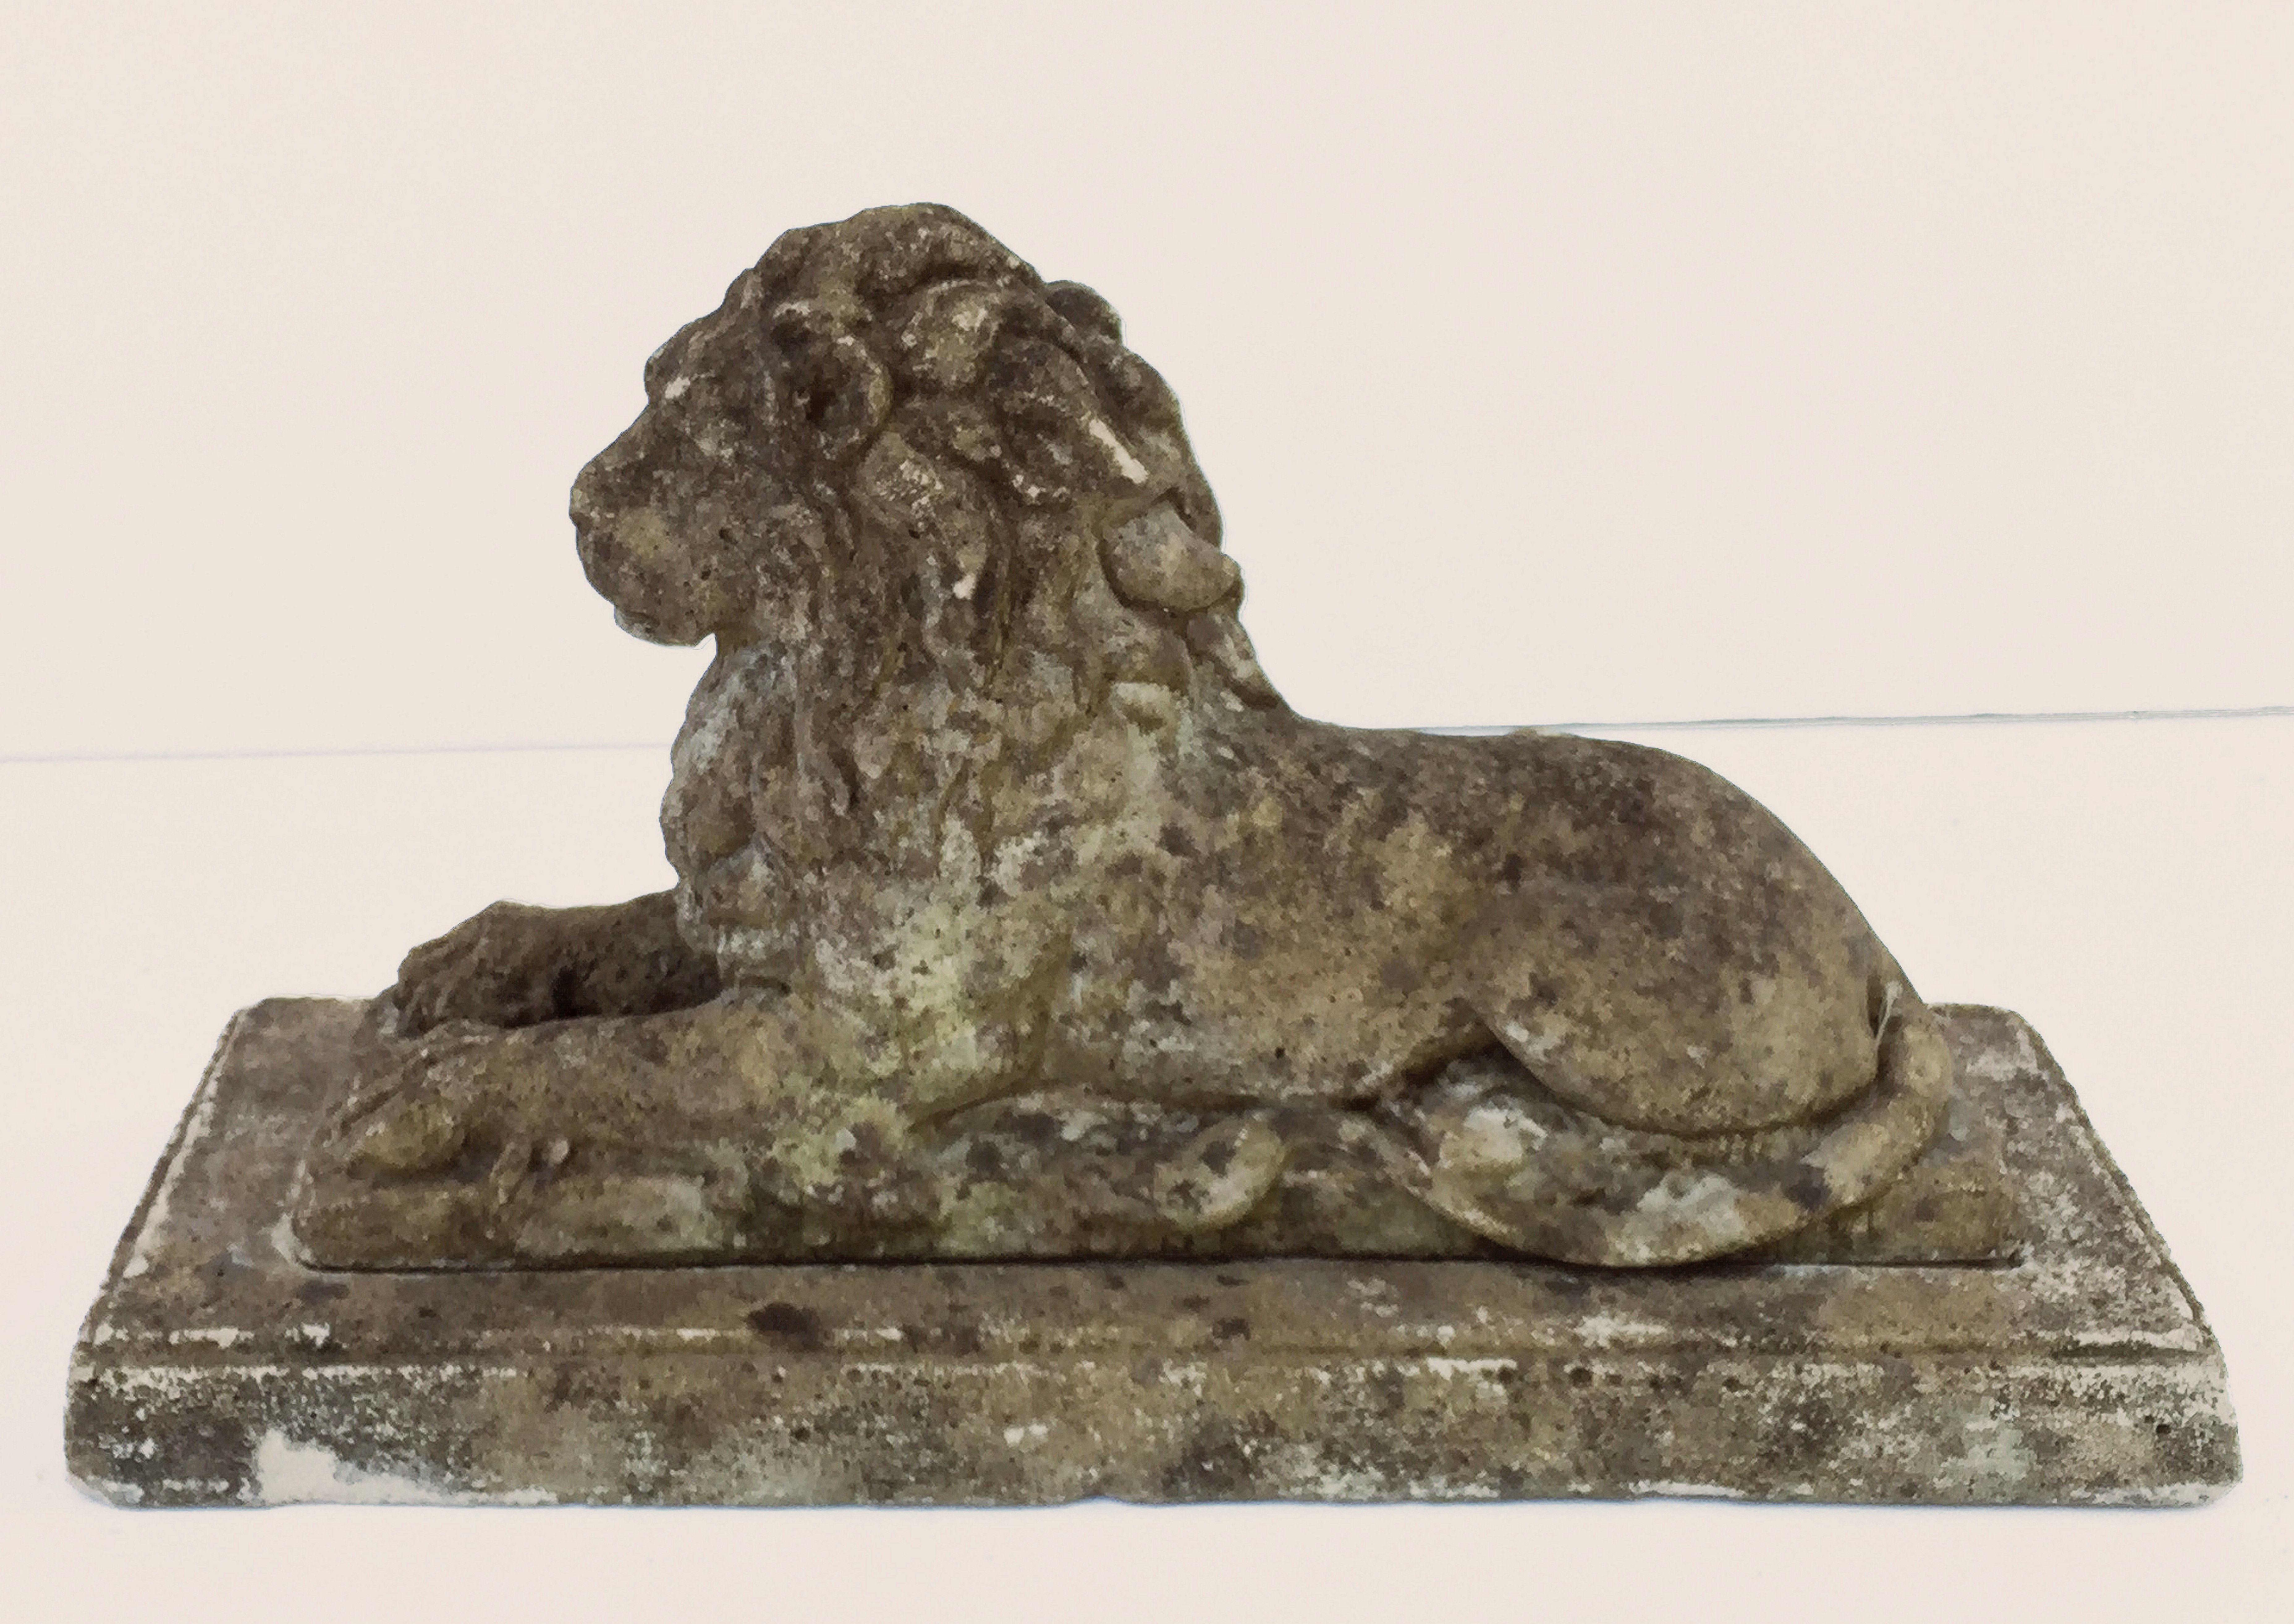 English Garden Stone Lions on Plinths 'Priced as a Pair' 2